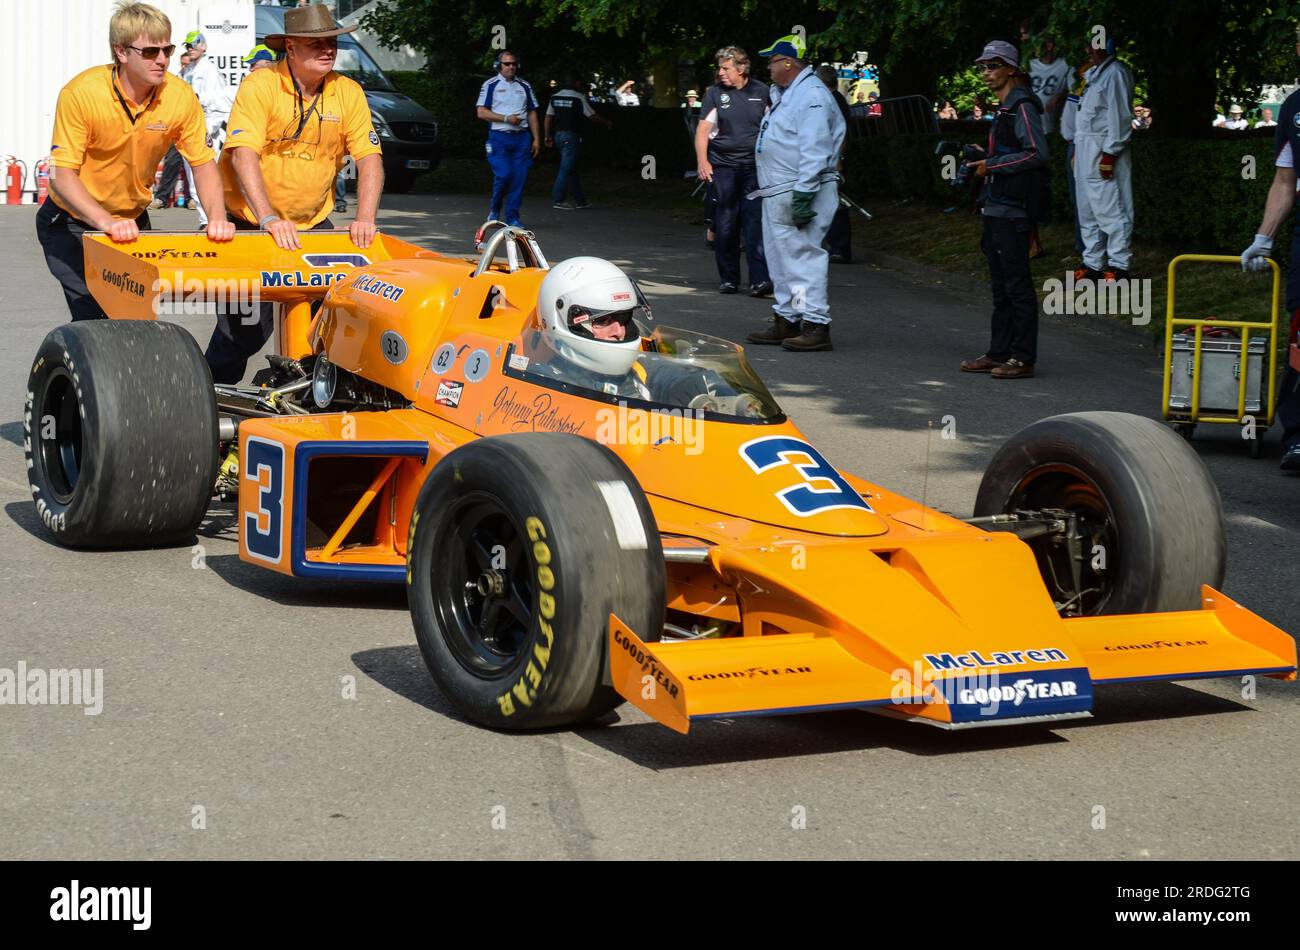 McLaren M16 prior to racing up the hill climb at the Goodwood Festival of Speed 2013. Car in which Johnny Rutherford won the 1974 Indianapolis 500 Stock Photo